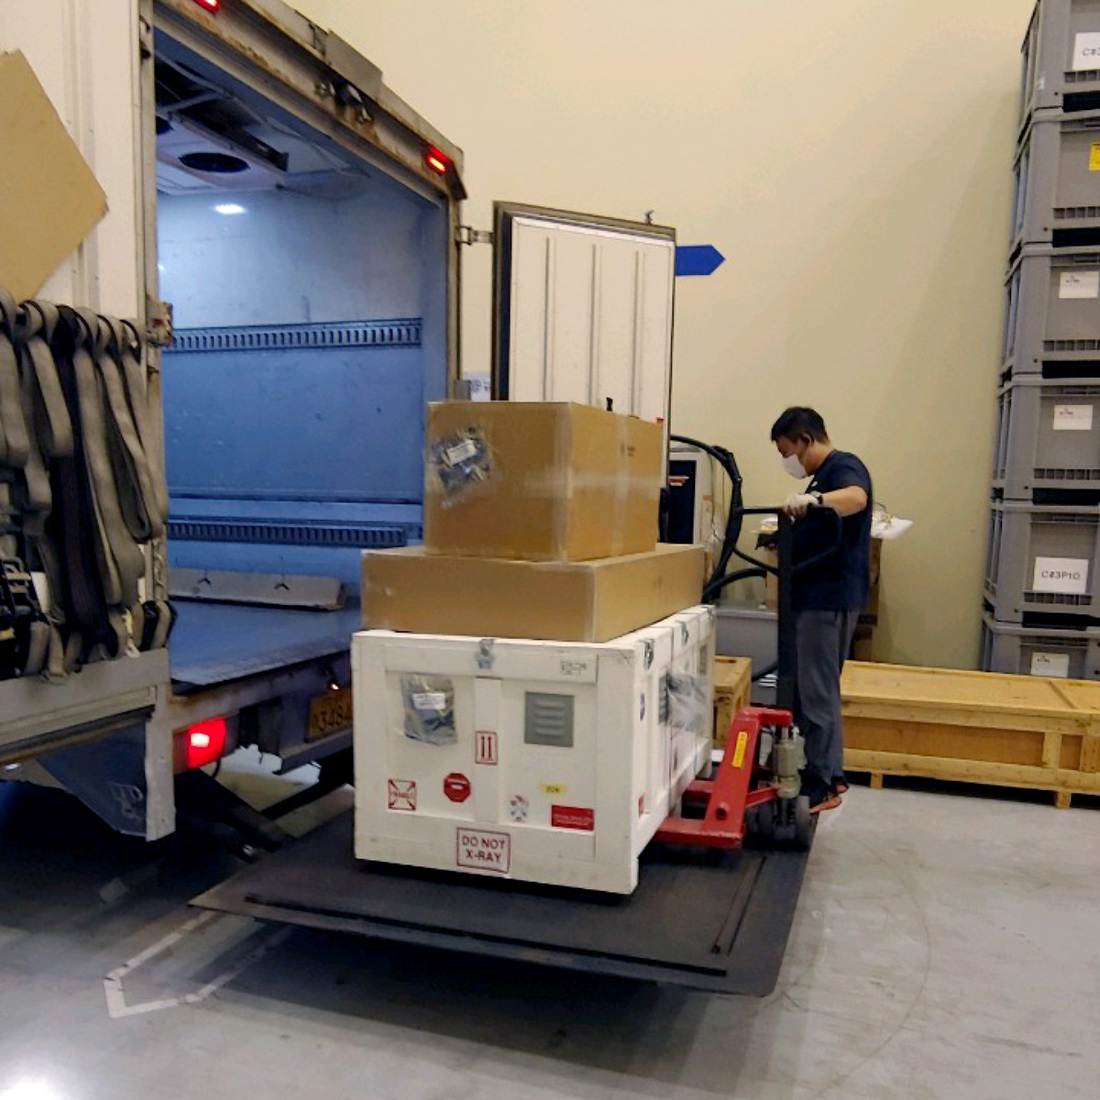 The ShadowCam instrument getting unloaded from the courier truck at KARI in South Korea on 17 August 2021.